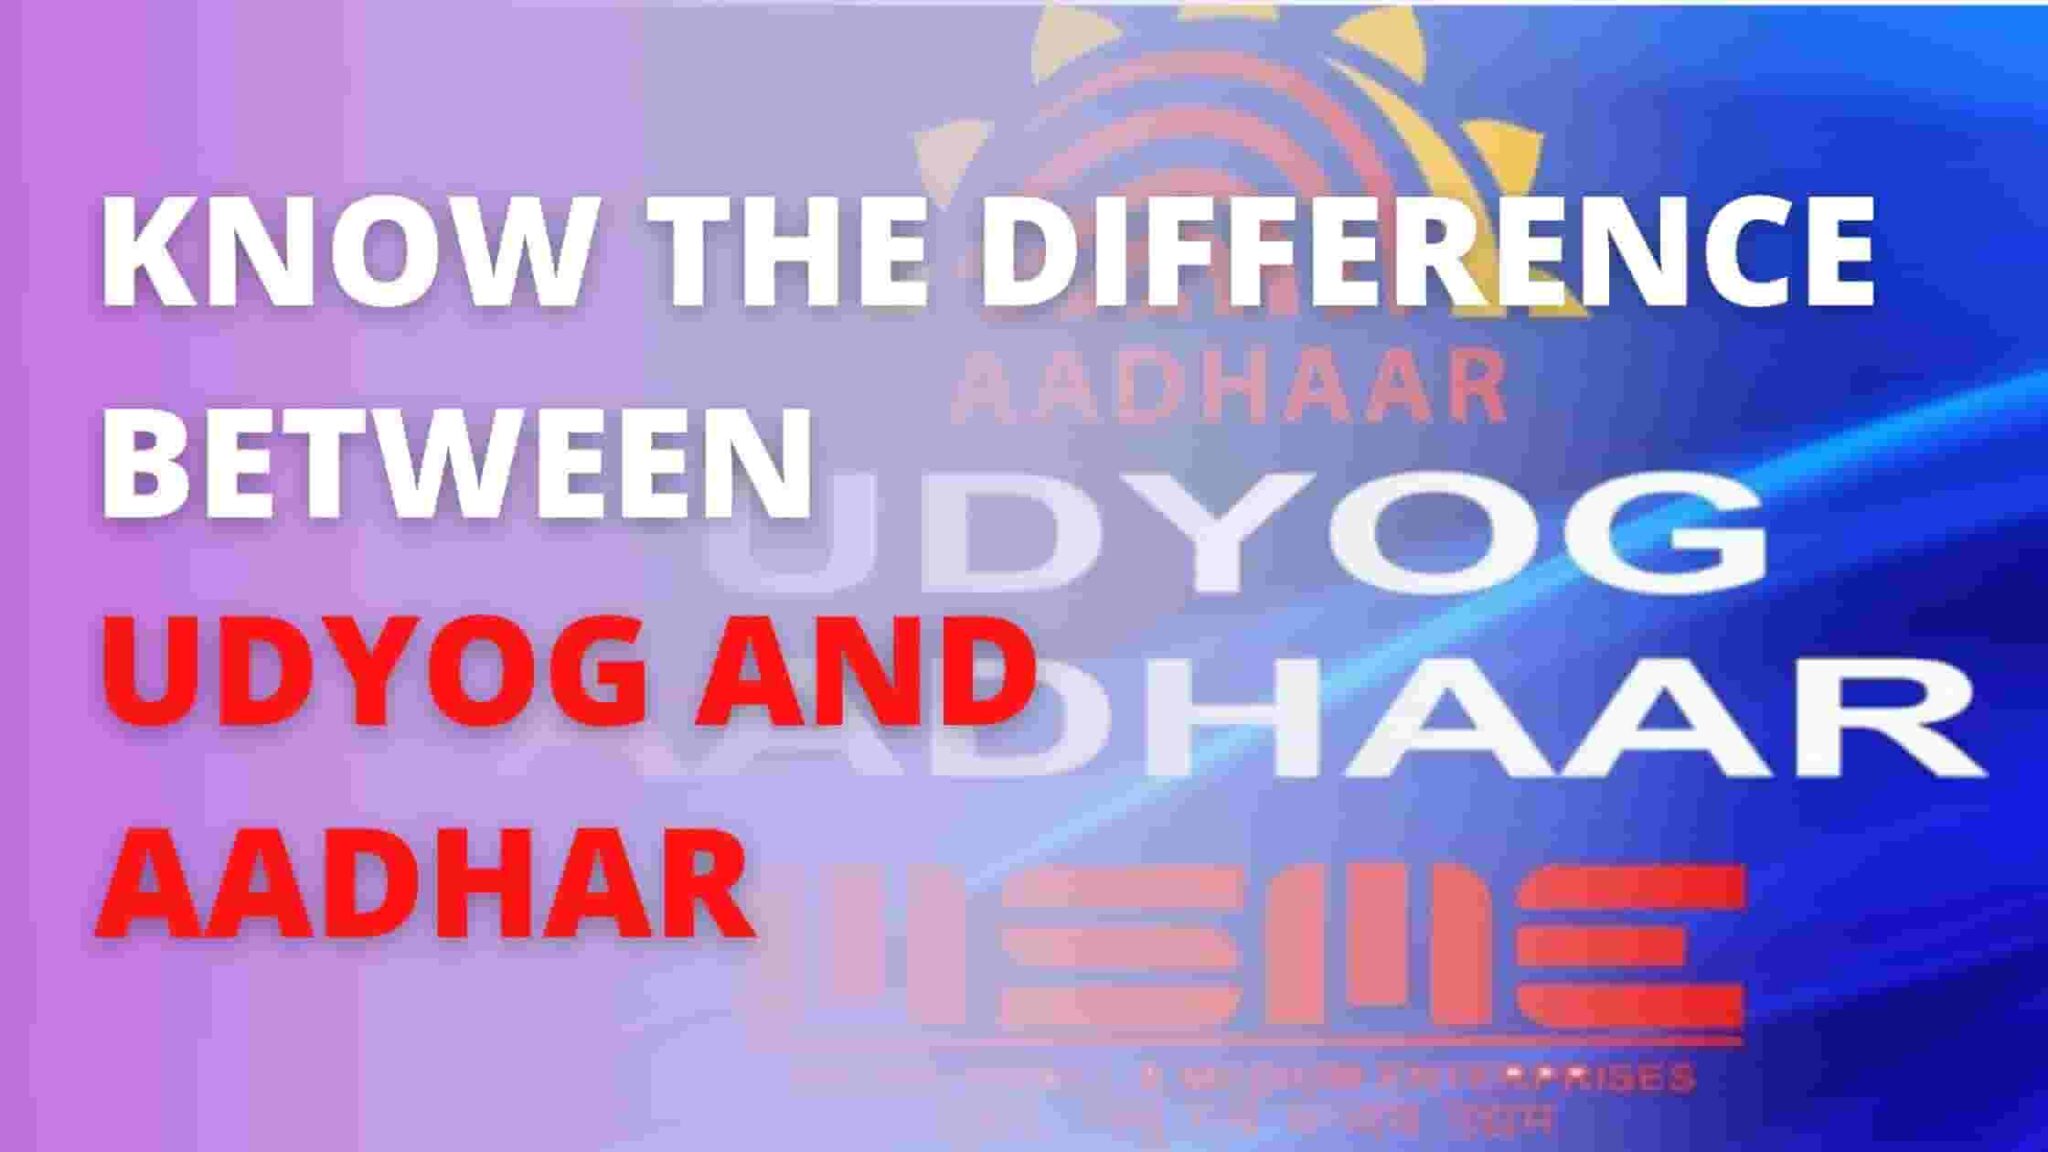 Difference Between Udyog and Aadhar